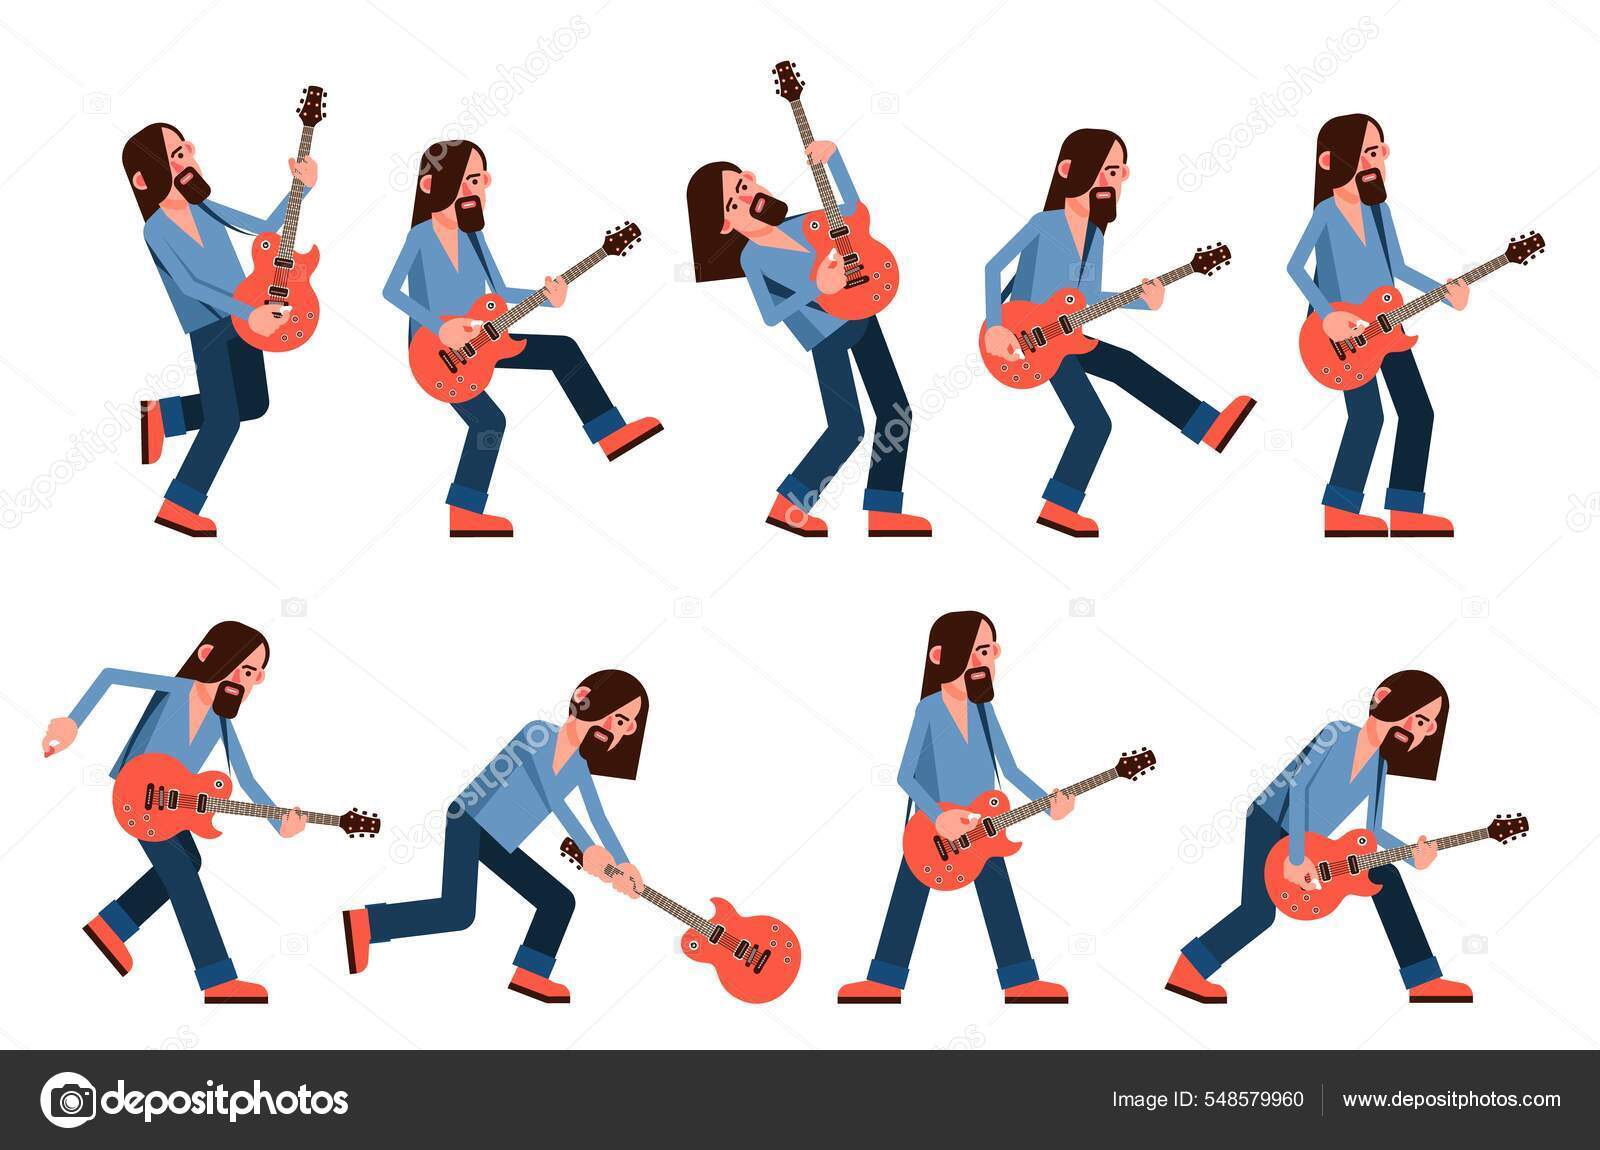 Guy with guitar Stock Photos, Royalty Free Guy with guitar Images |  Depositphotos